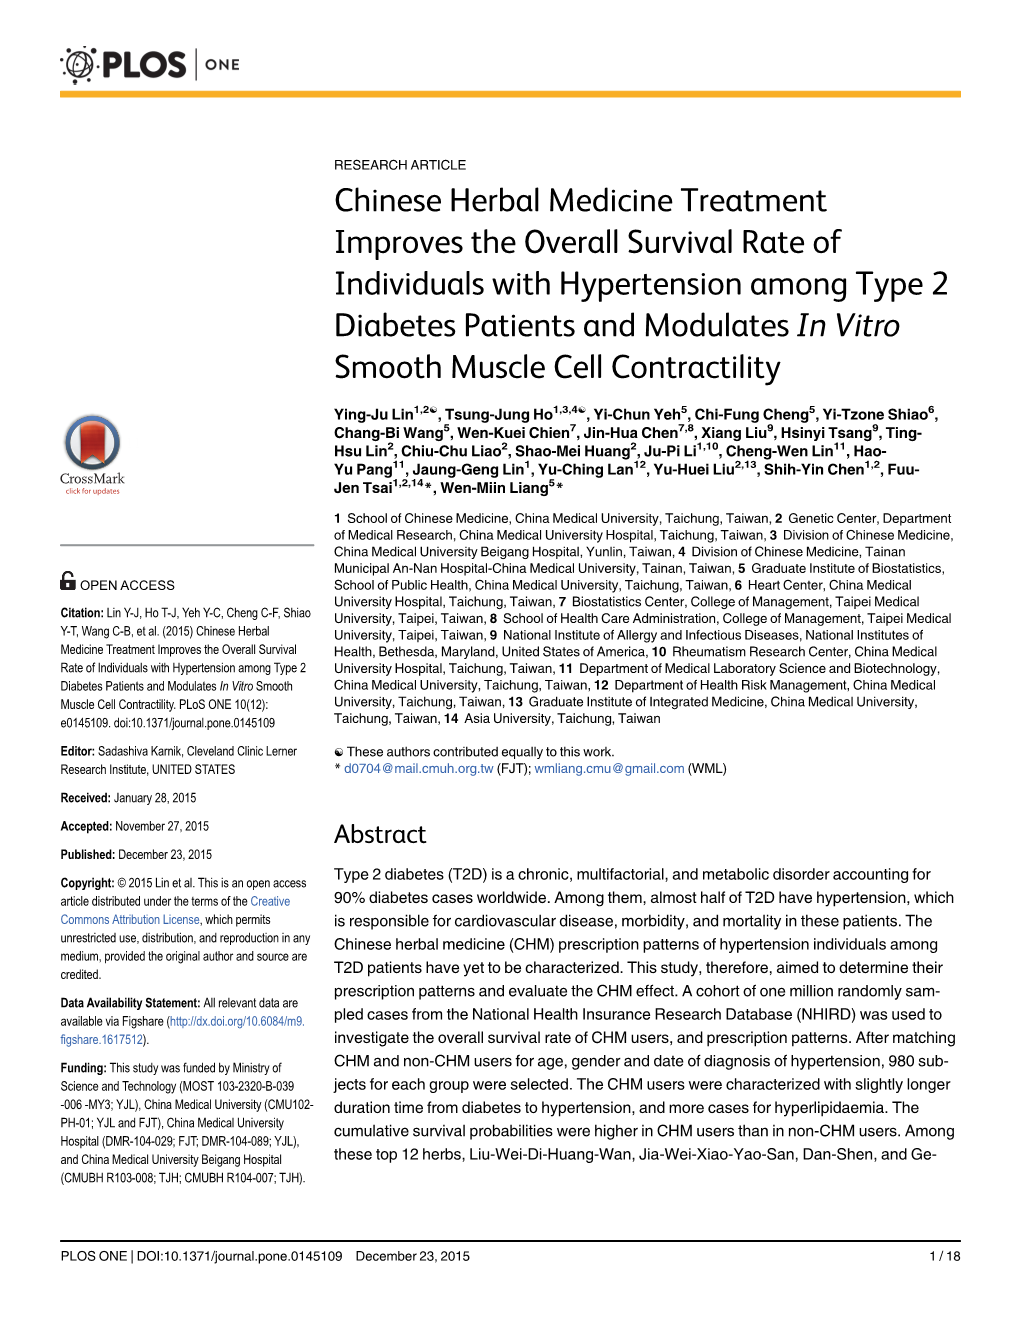 Chinese Herbal Medicine Treatment Improves the Overall Survival Rate of Individuals with Hypertension Among Type 2 Diabetes Pati